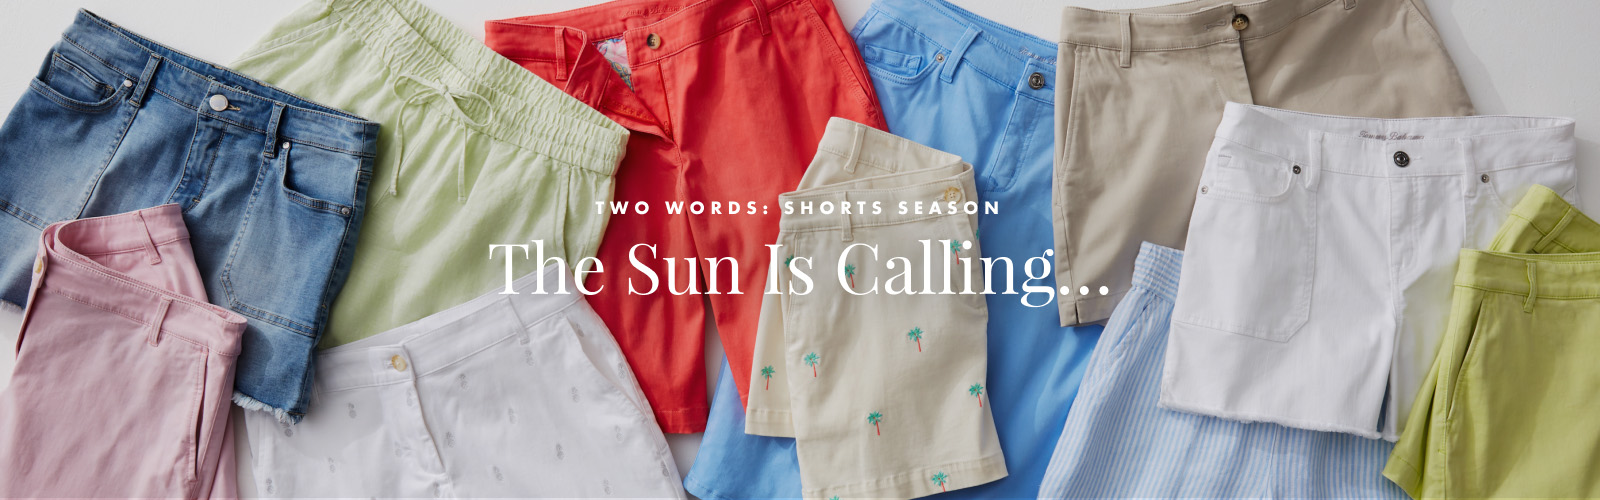 Two Words: Shorts Season - The Sun Is Calling...